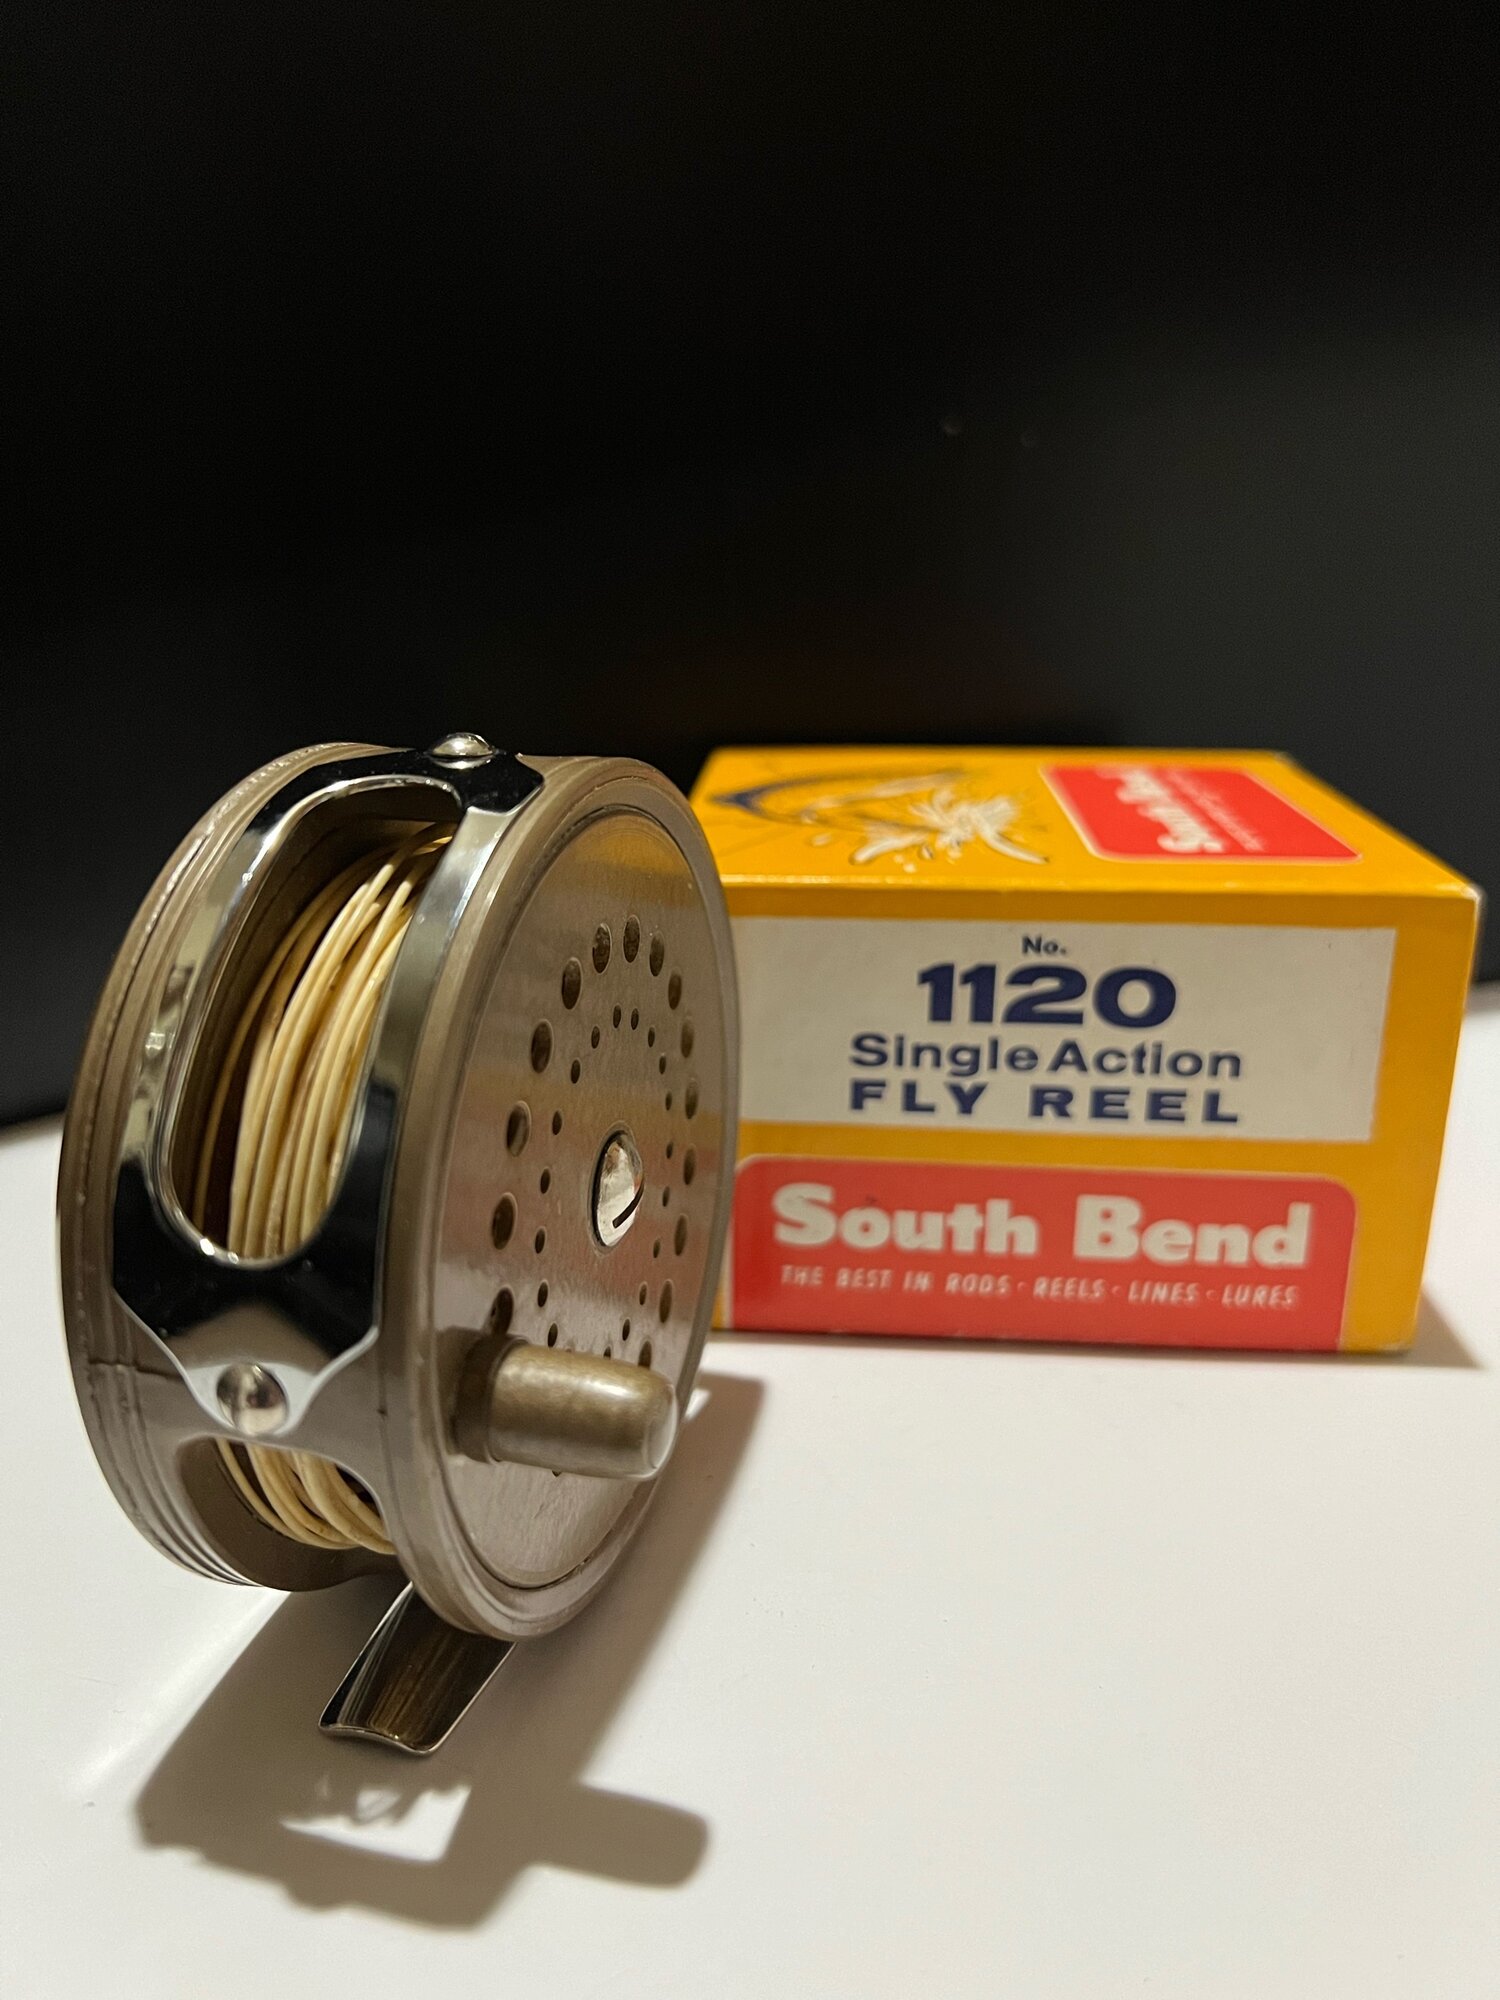 South Bend Auto-Matic Fly Rod Reel No. 1180 with original Box